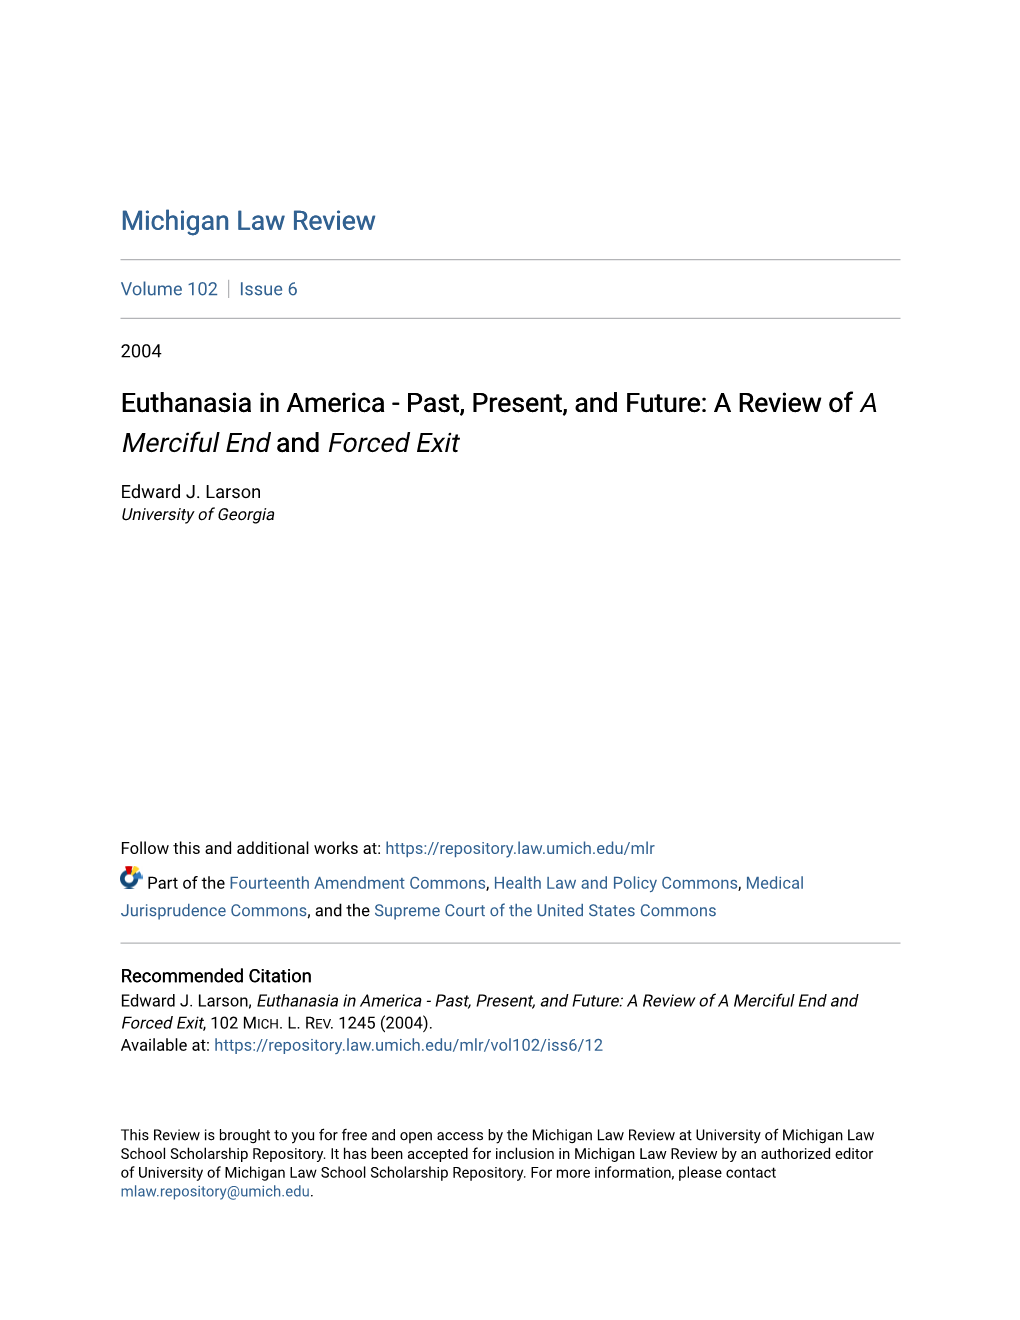 Euthanasia in America - Past, Present, and Future: a Review of a Merciful End and Forced Exit